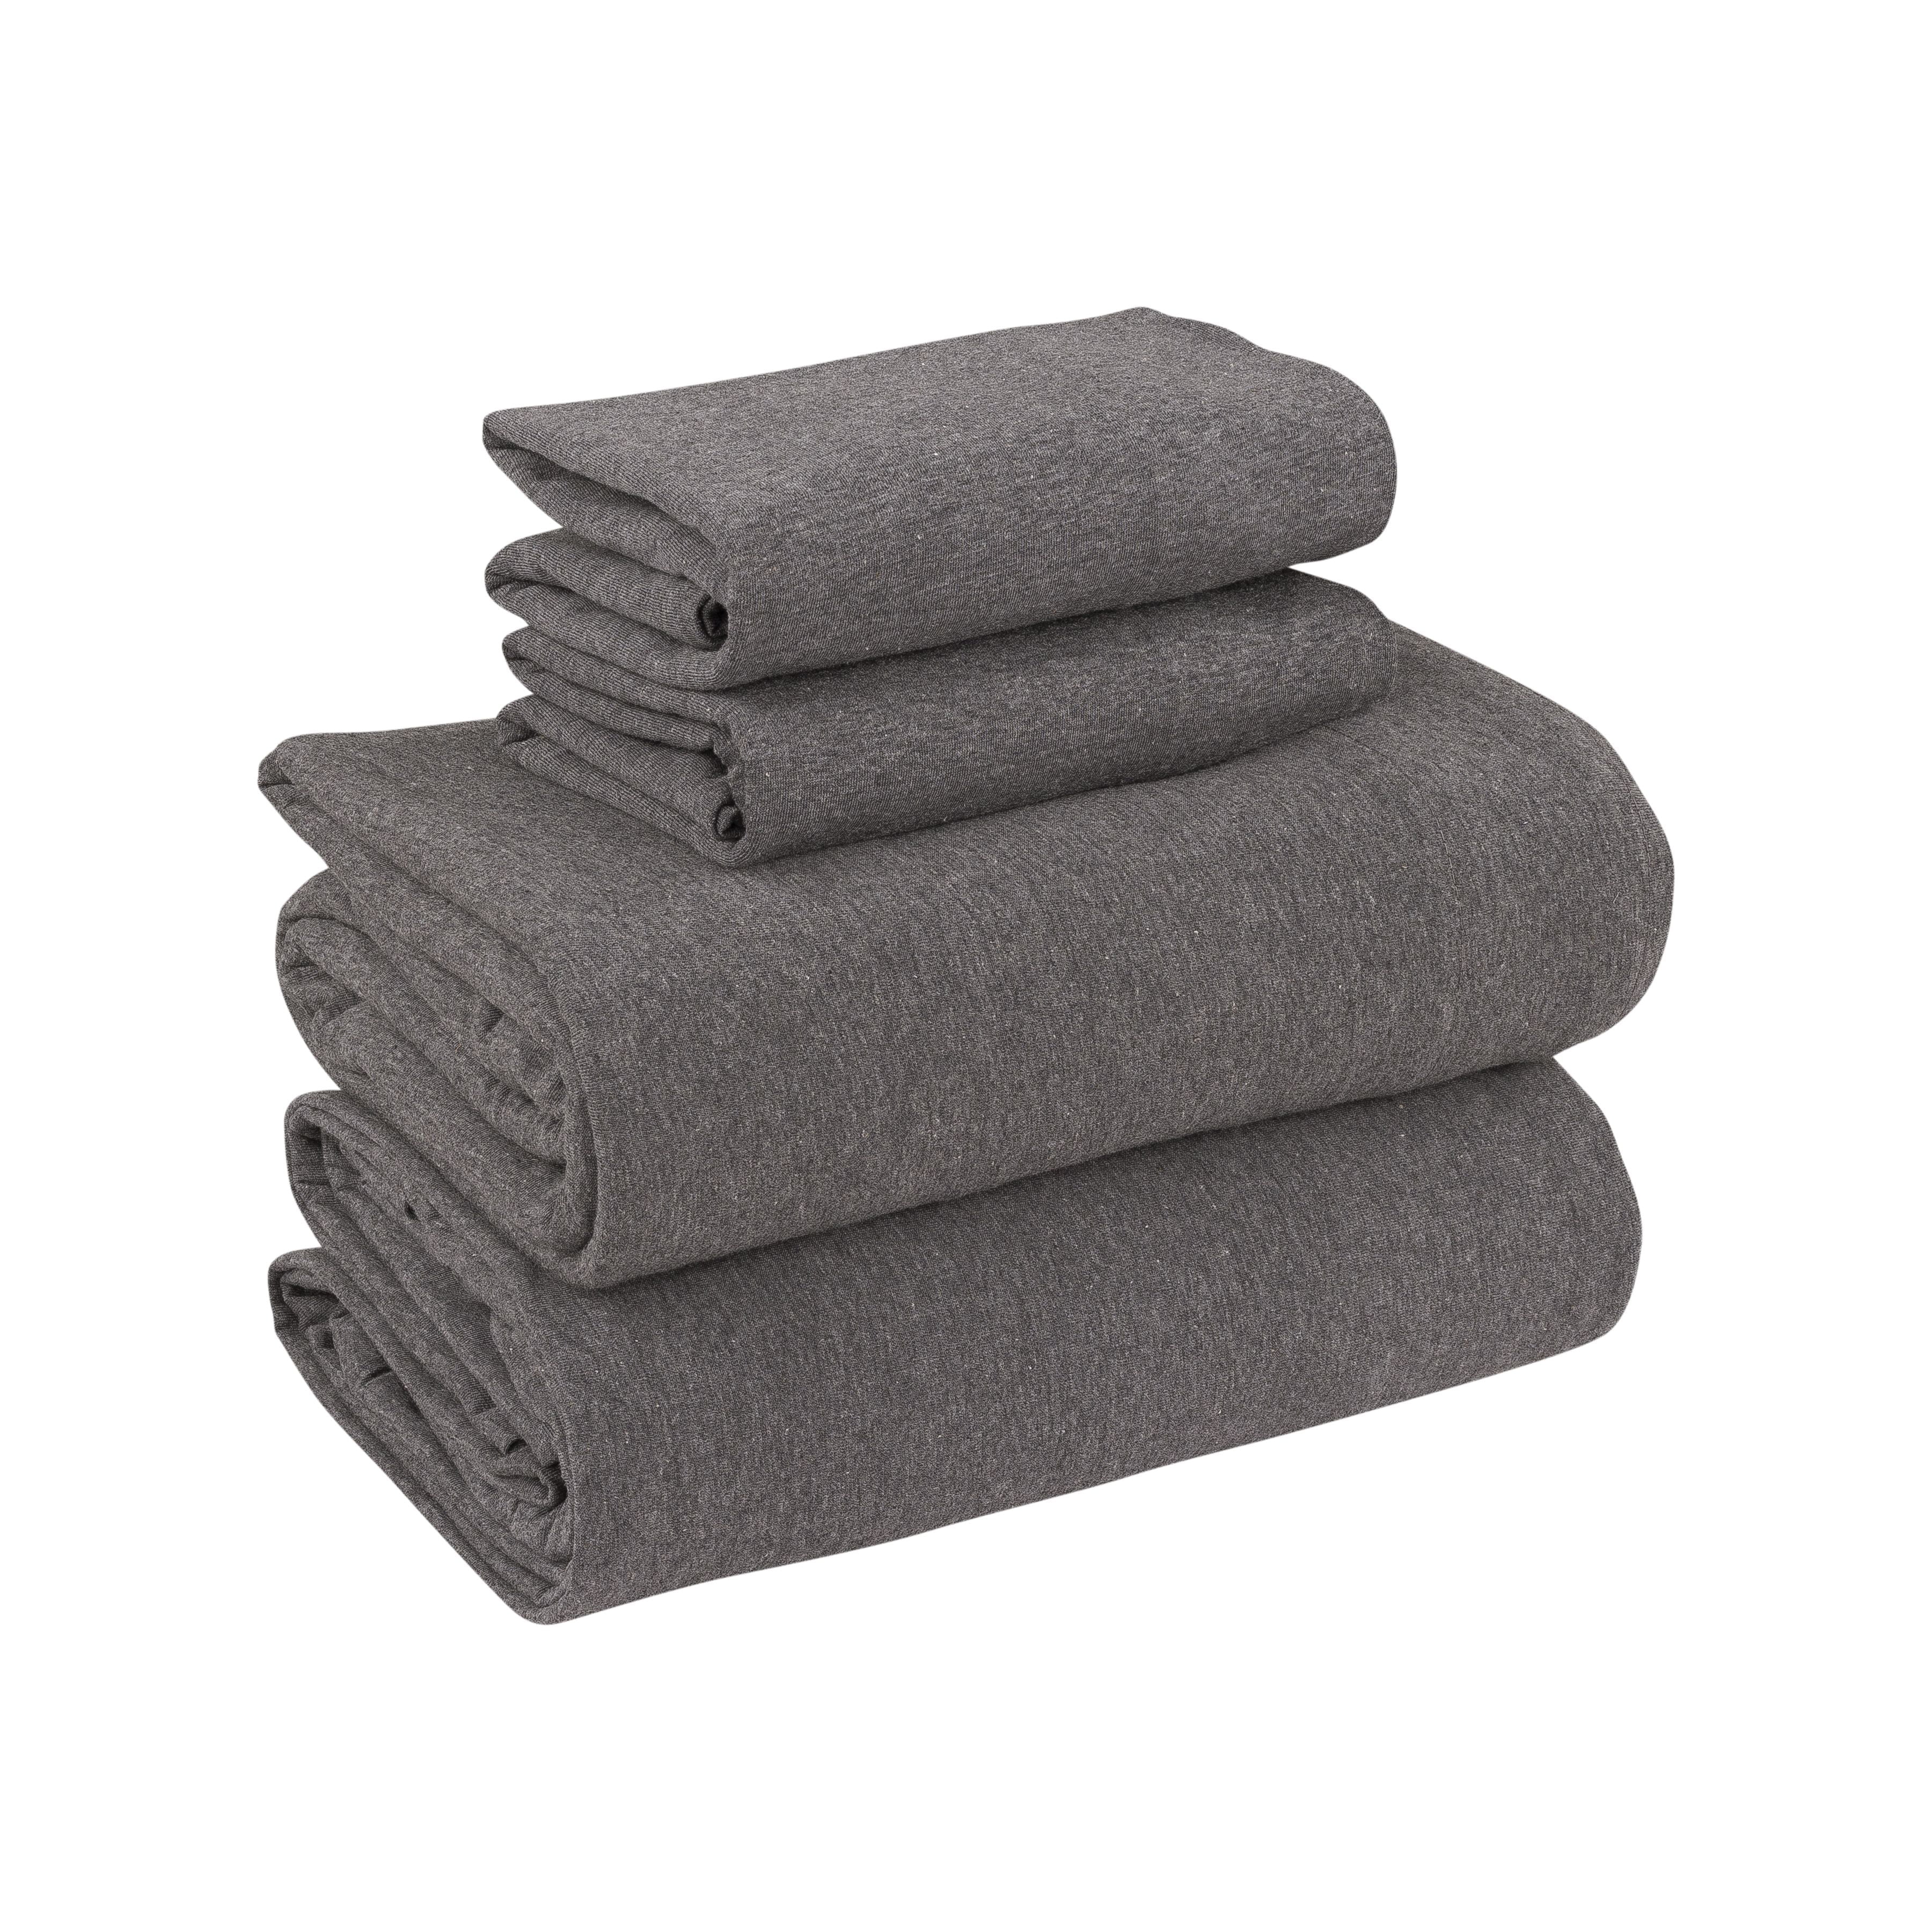 Mainstays Extra Soft Jersey Bed Sheet Set, Twin/Twin XL, Grey Heather, 3 Pieces